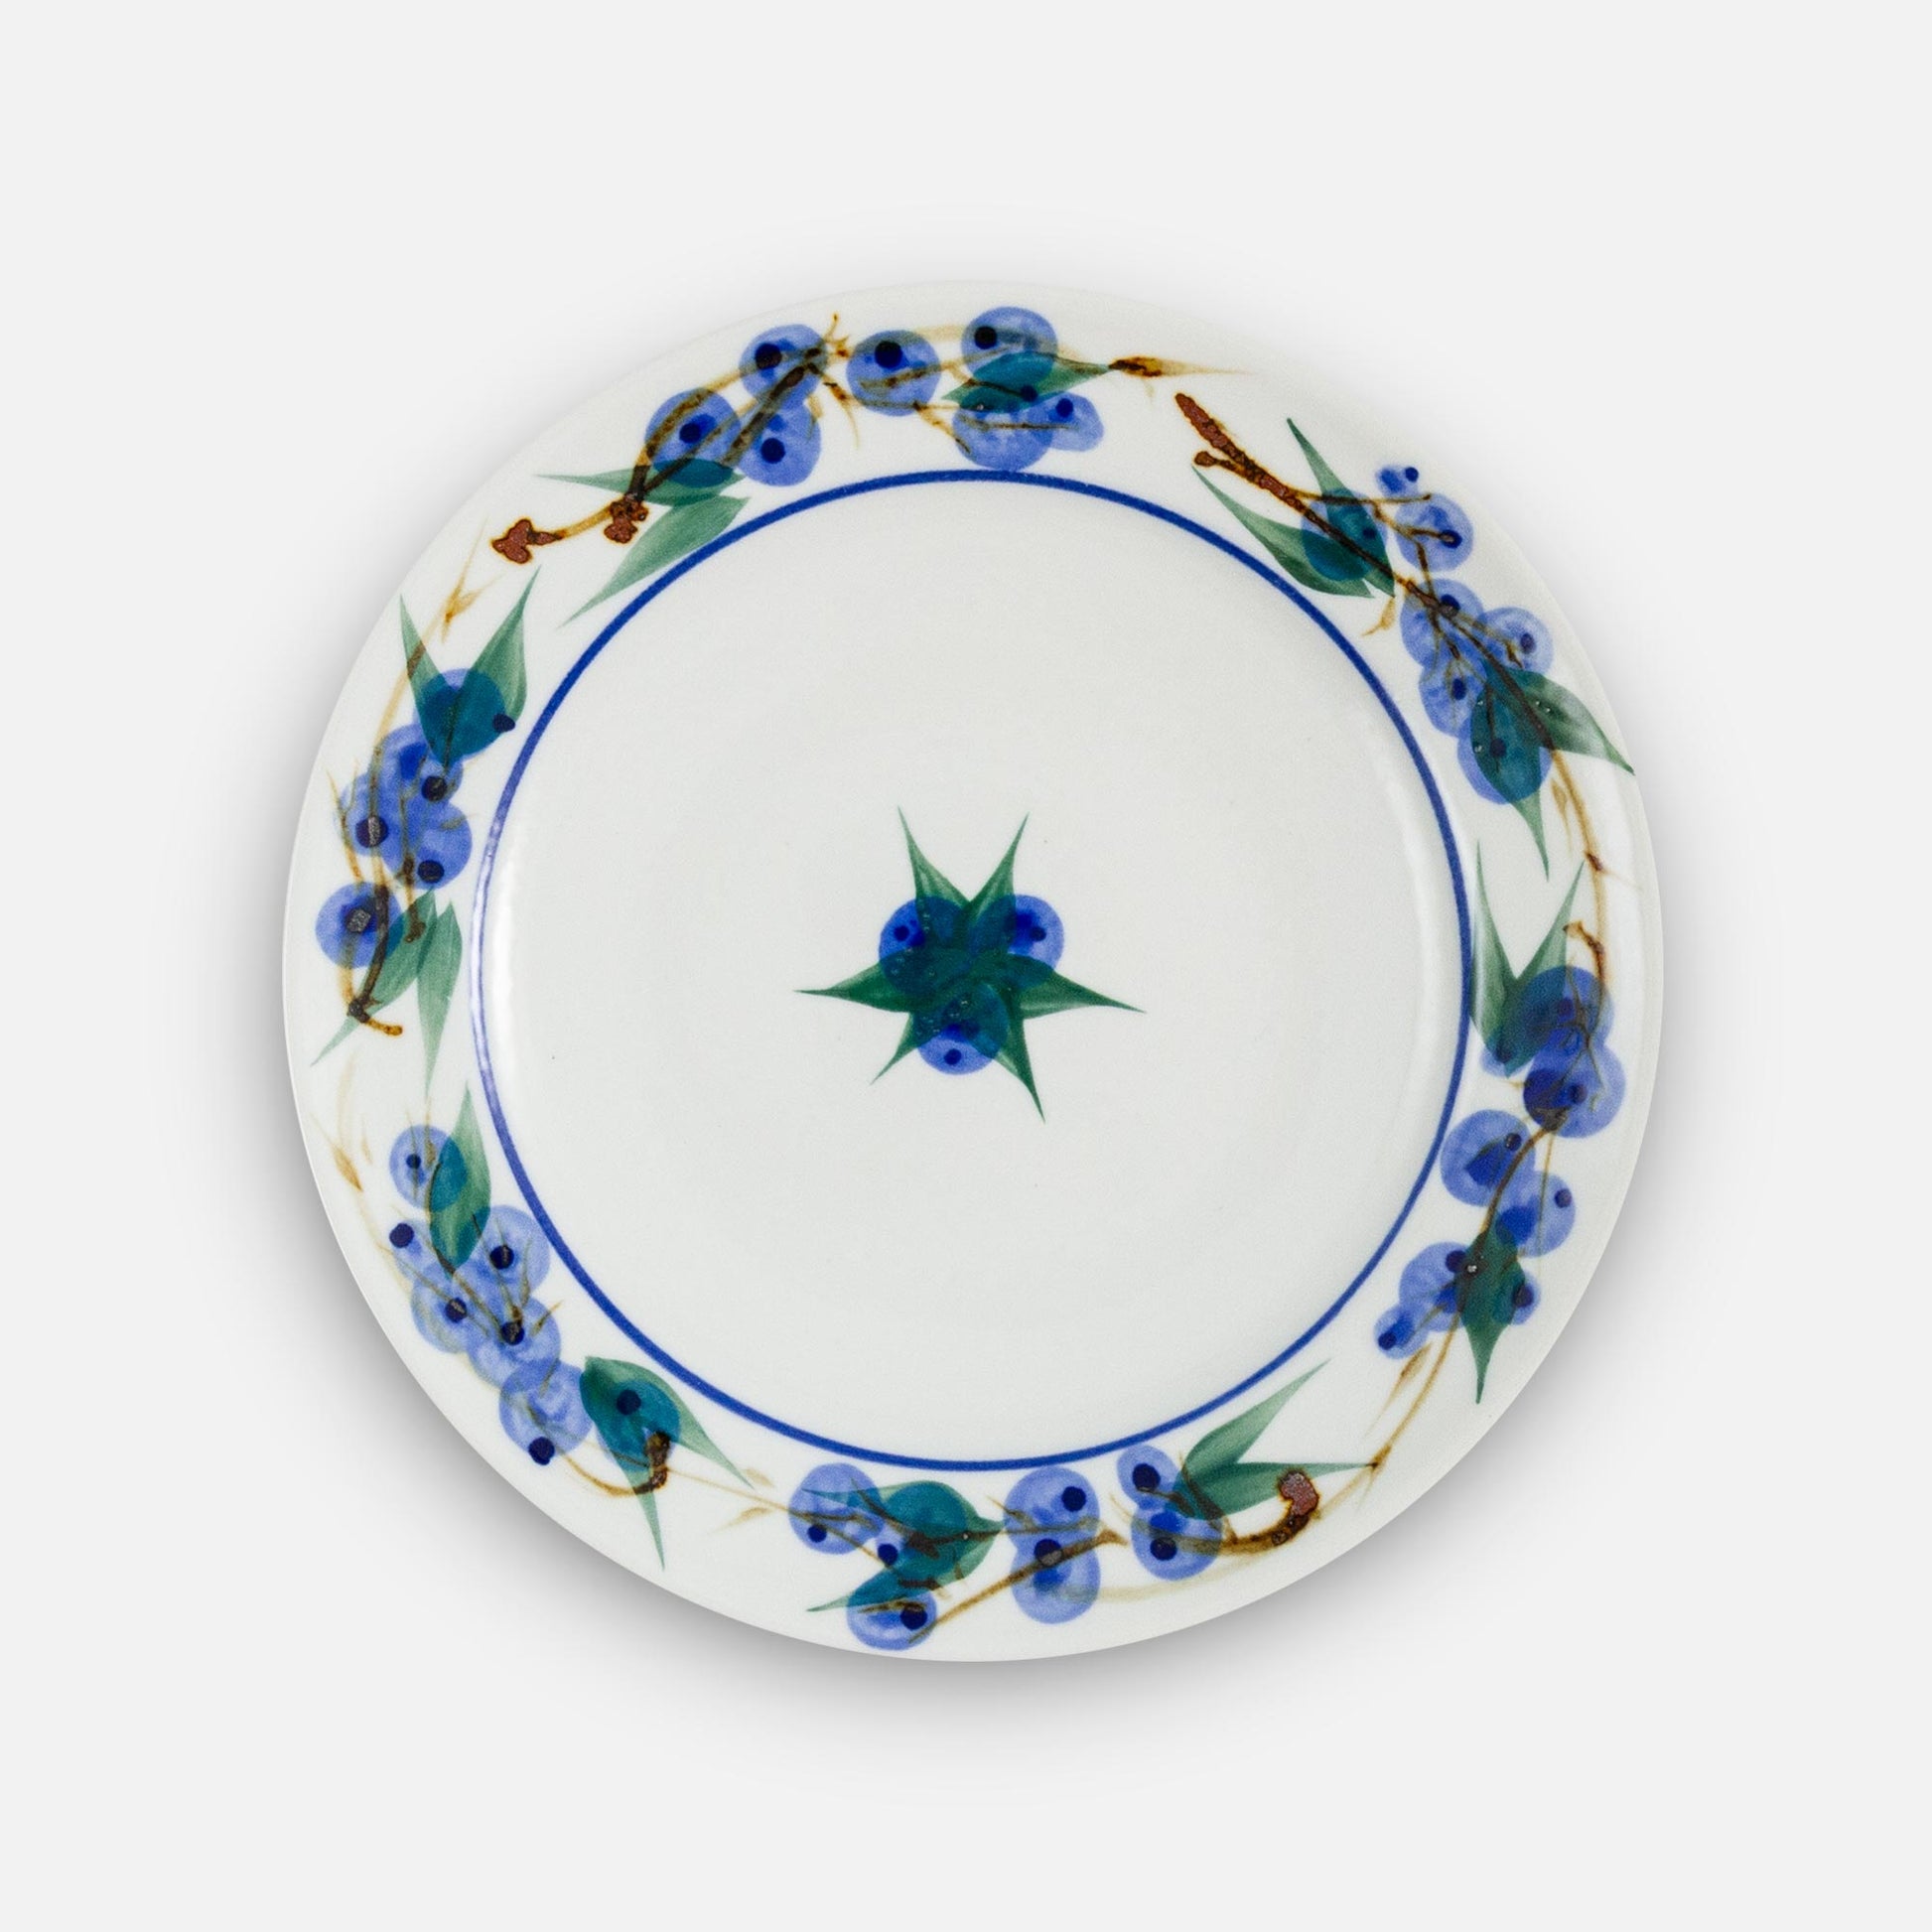 Handmade Pottery Rimless Dinner Plate made by Georgetown Pottery in Maine in Blueberry pattern